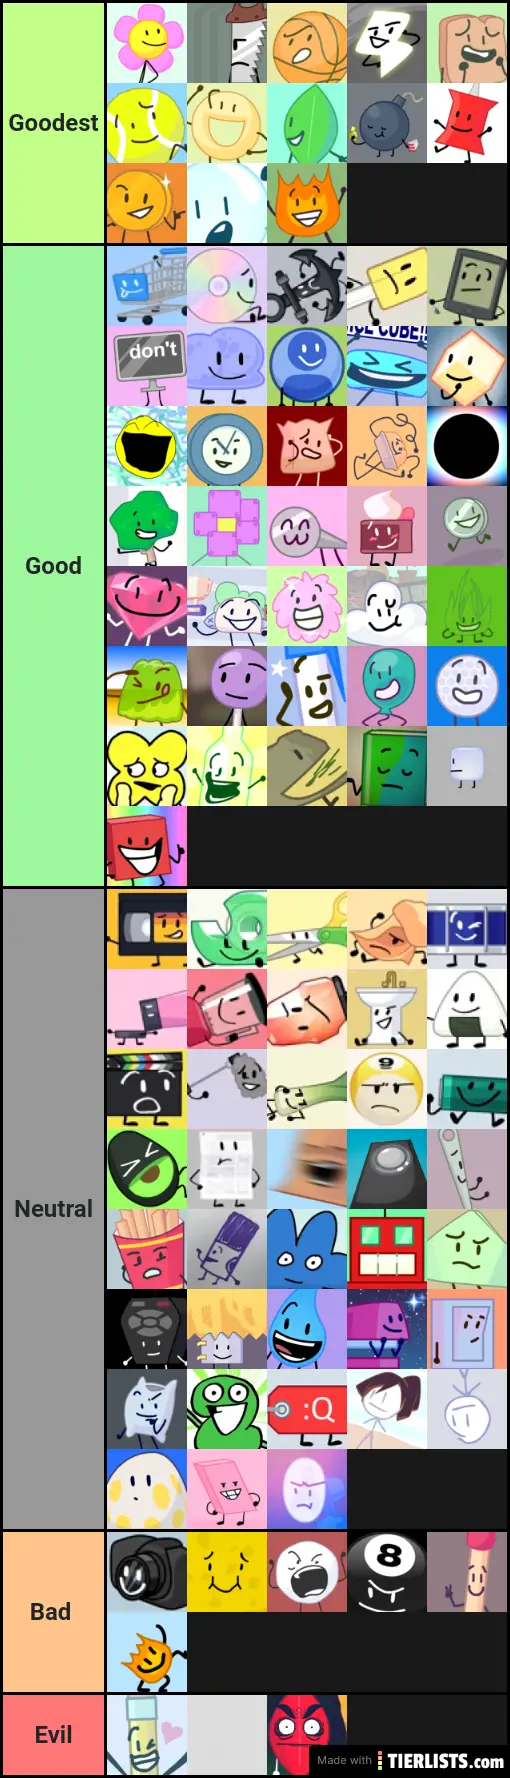 Bfdi Characters Good to Evil (BFB Verison)